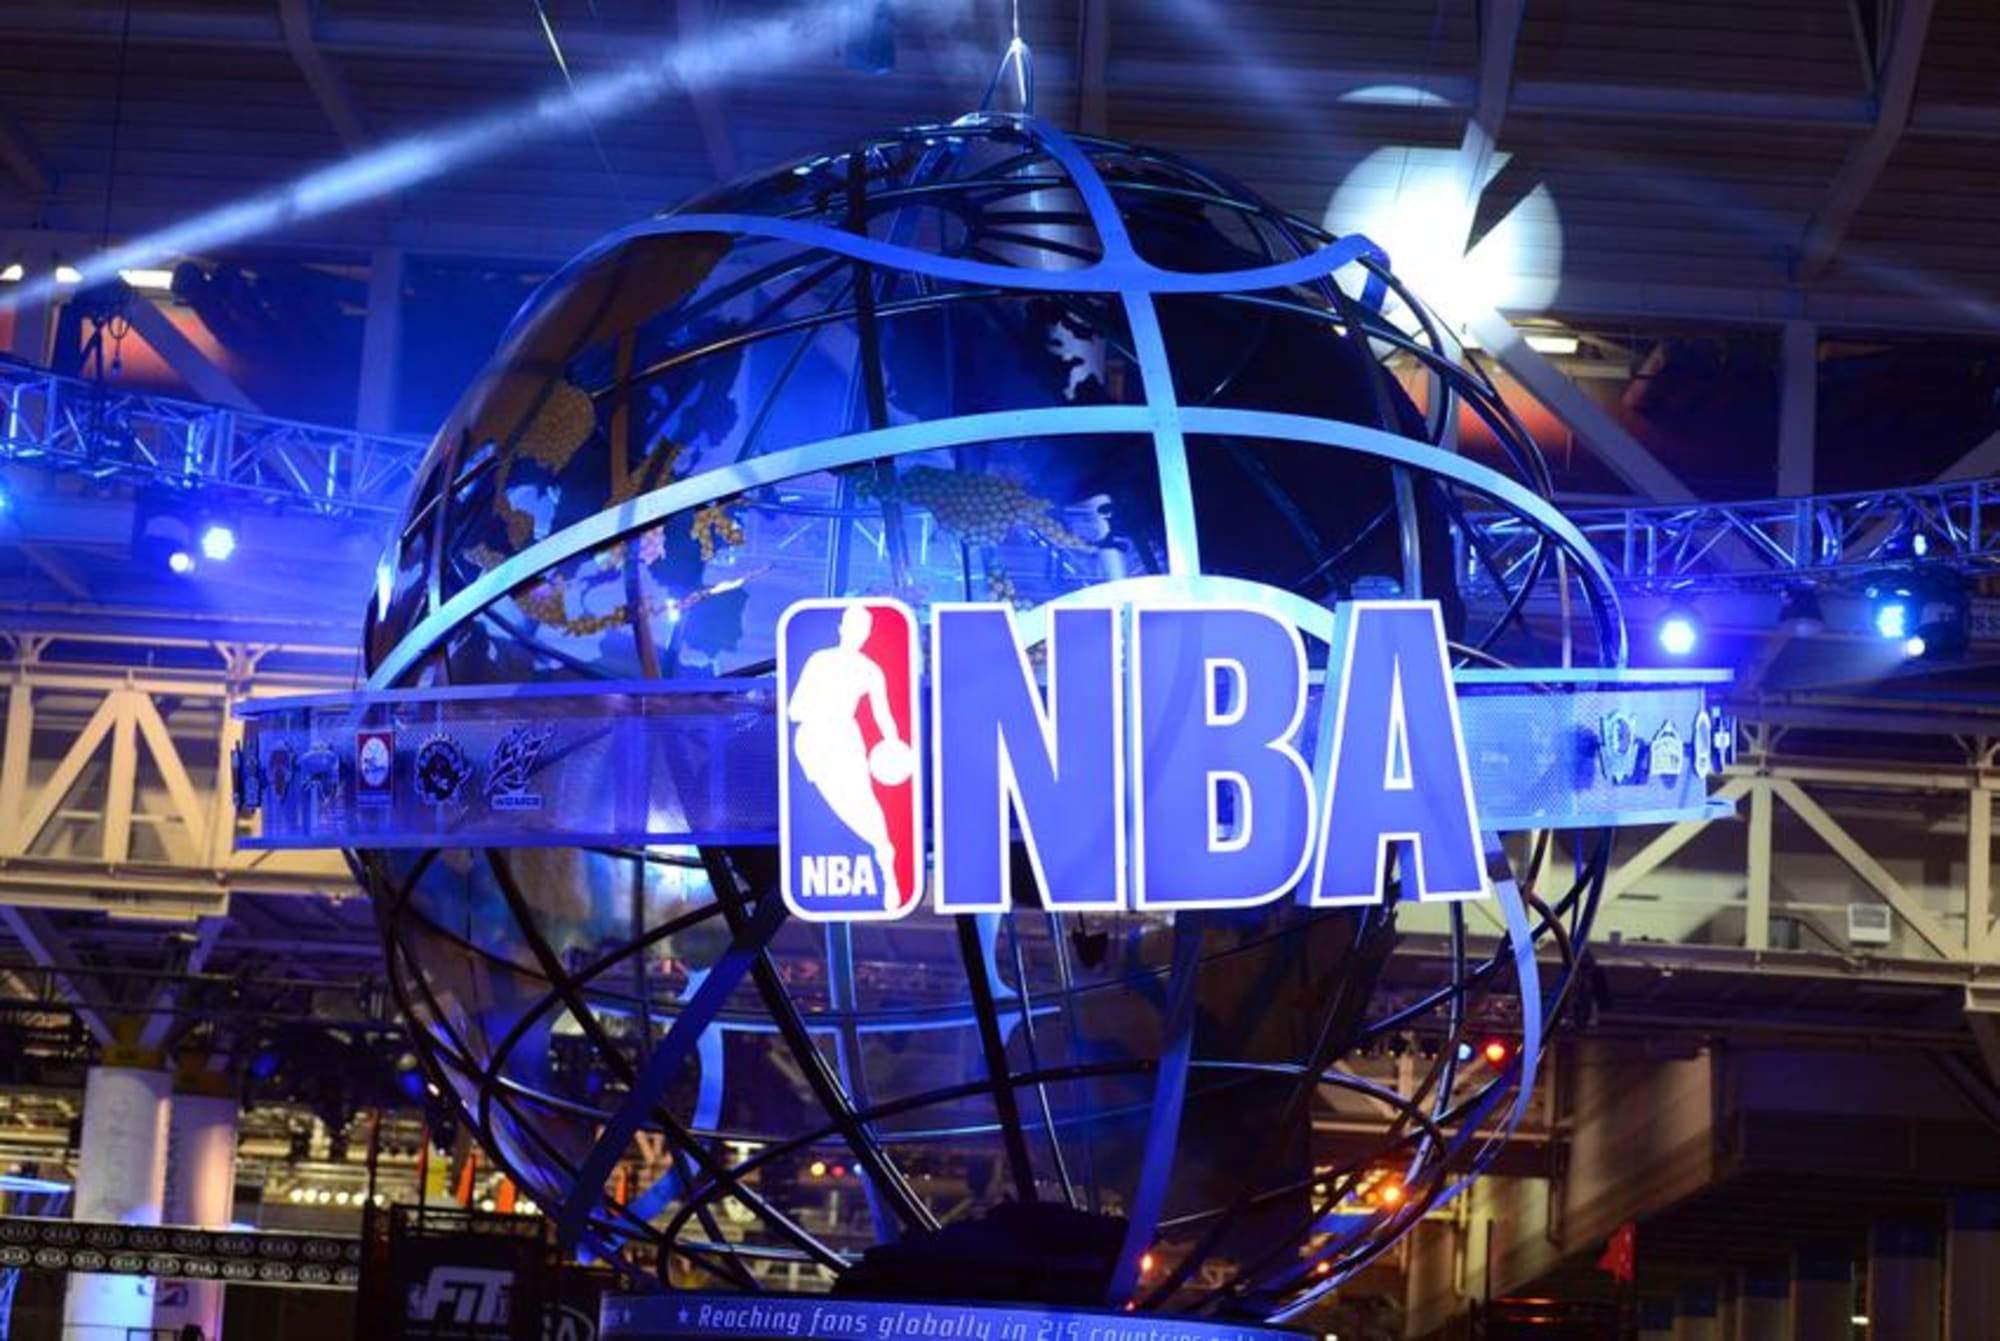 NBA Draft Lottery 2014 Updated odds for No. 1 pick